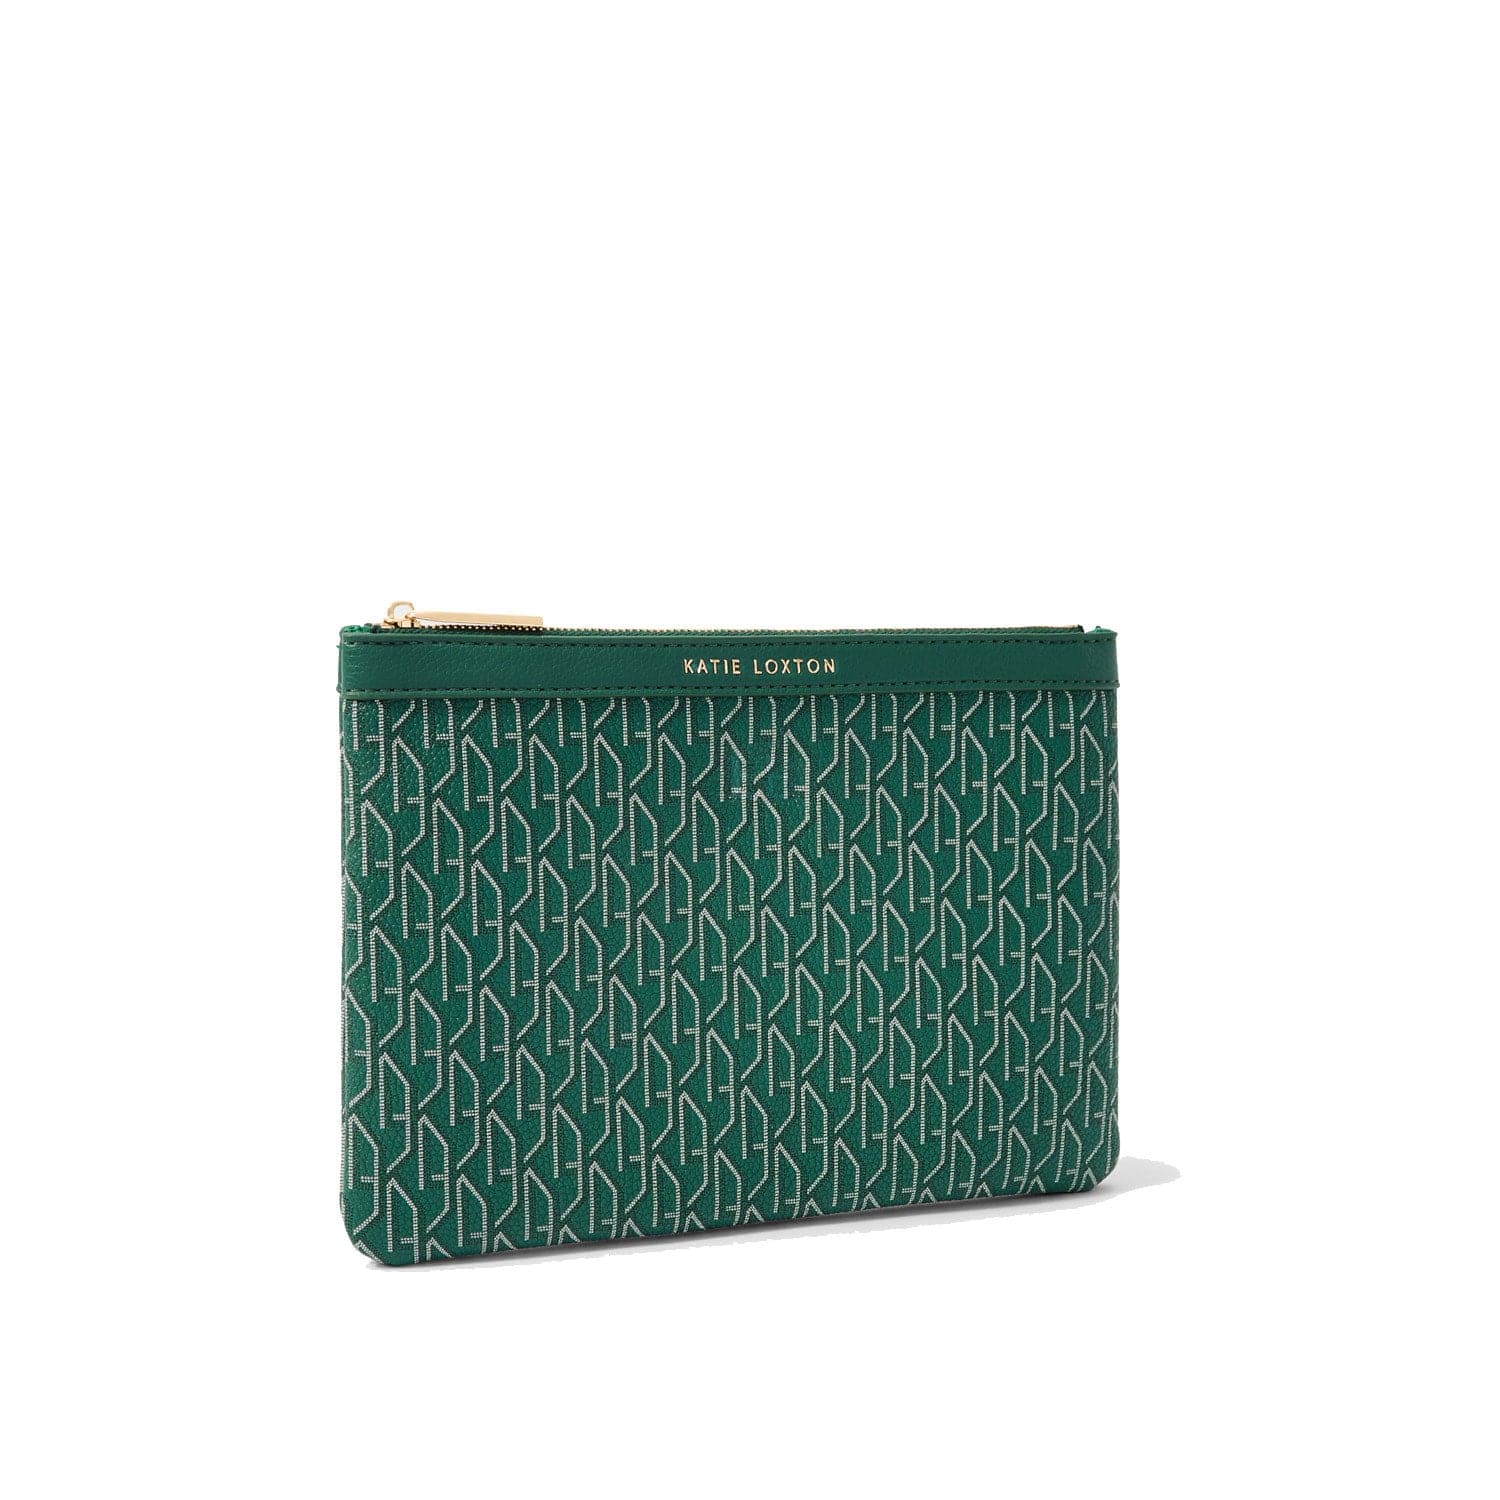 Katie Loxton Purse Katie Loxton Signature Pouch - Black / Taupe / Off White / Emerald Green / Chocolate